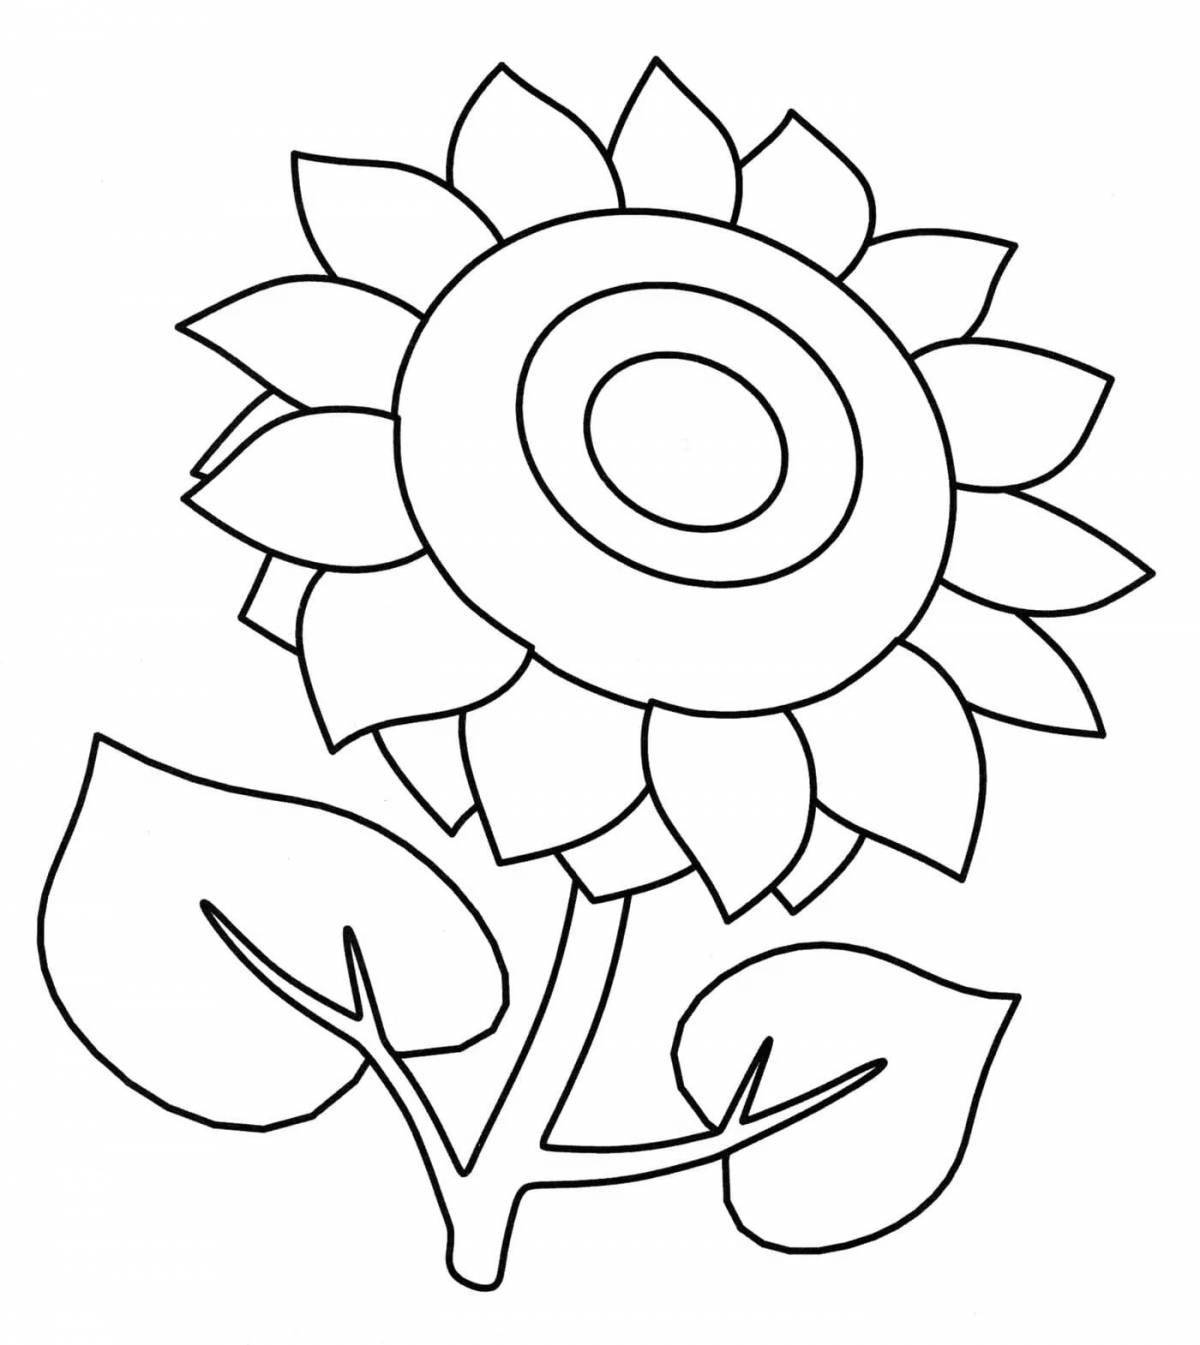 Fabulous coloring pages with sunflowers for children 2-3 years old